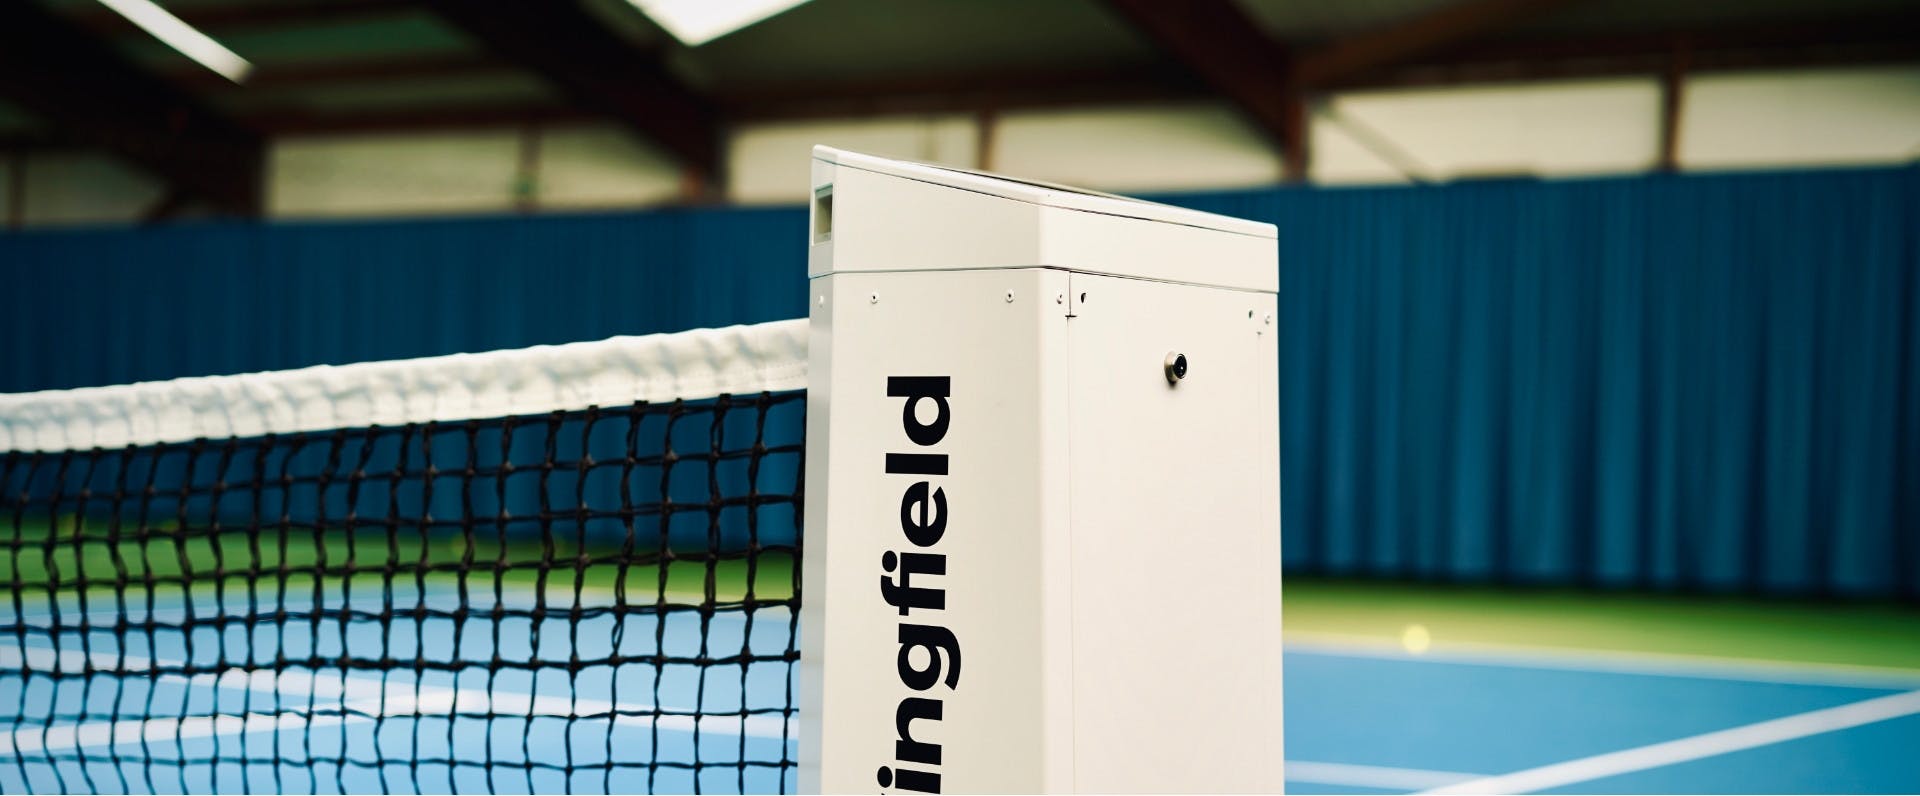 Wingfield box on an indoor court.